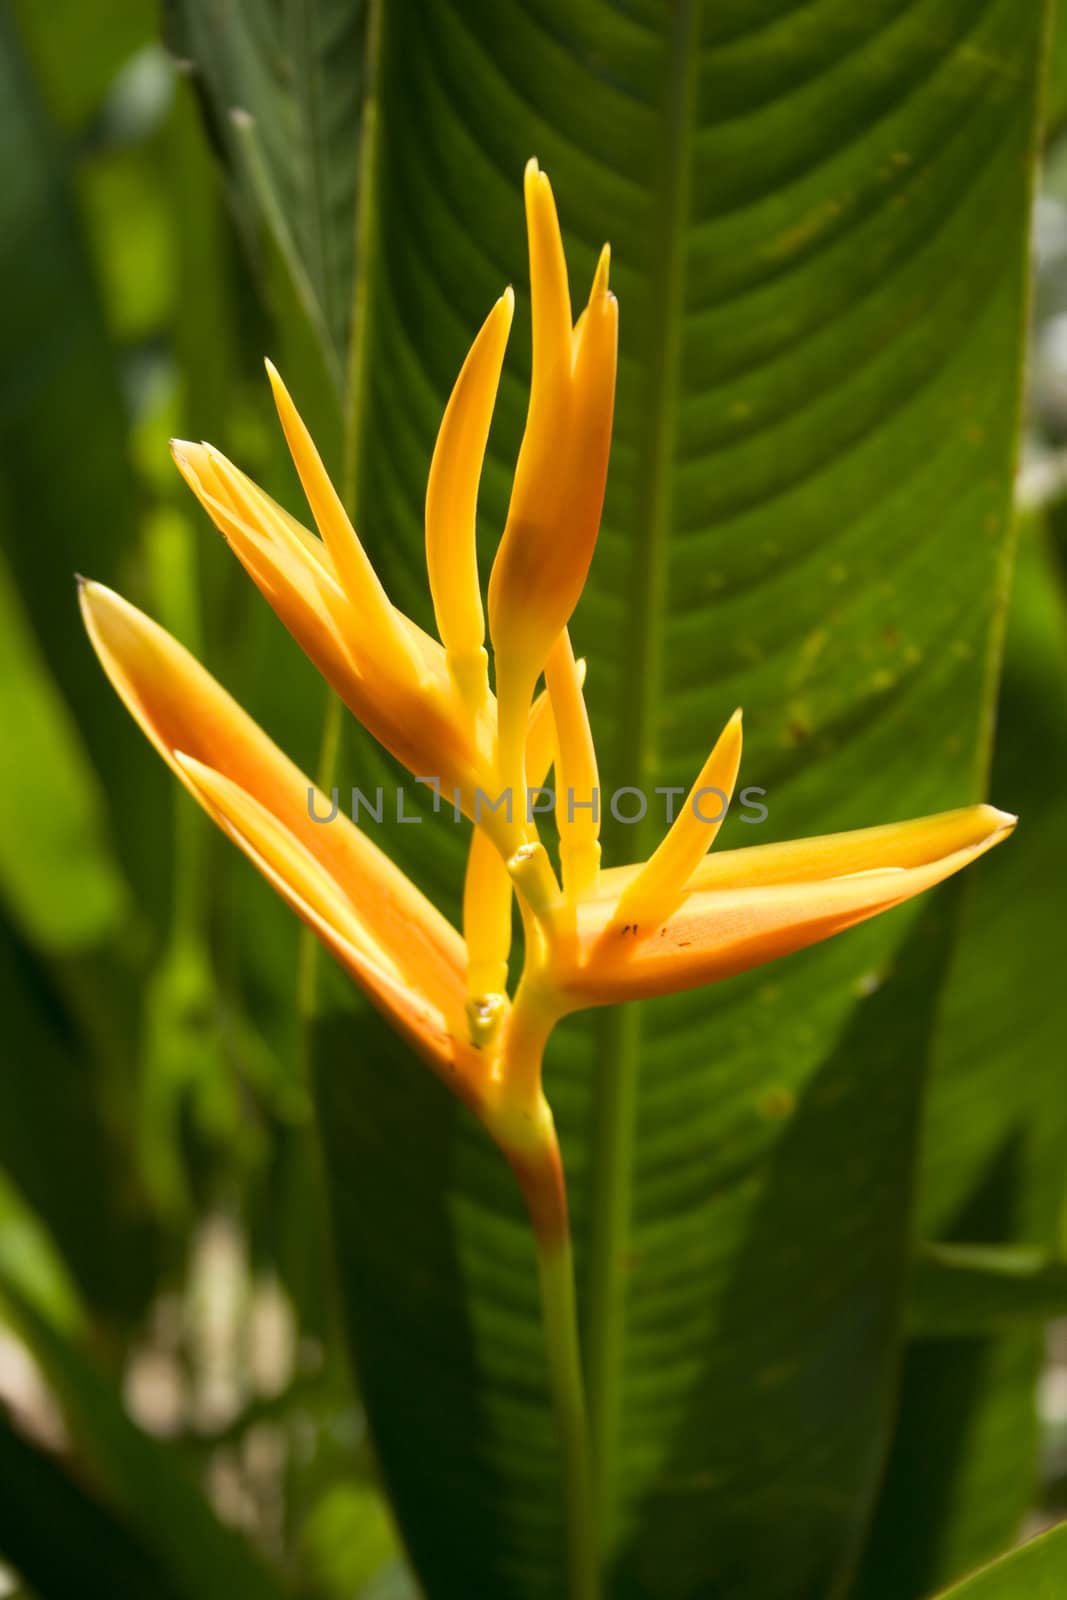 Tropical Flower Heliconia found in a garden.